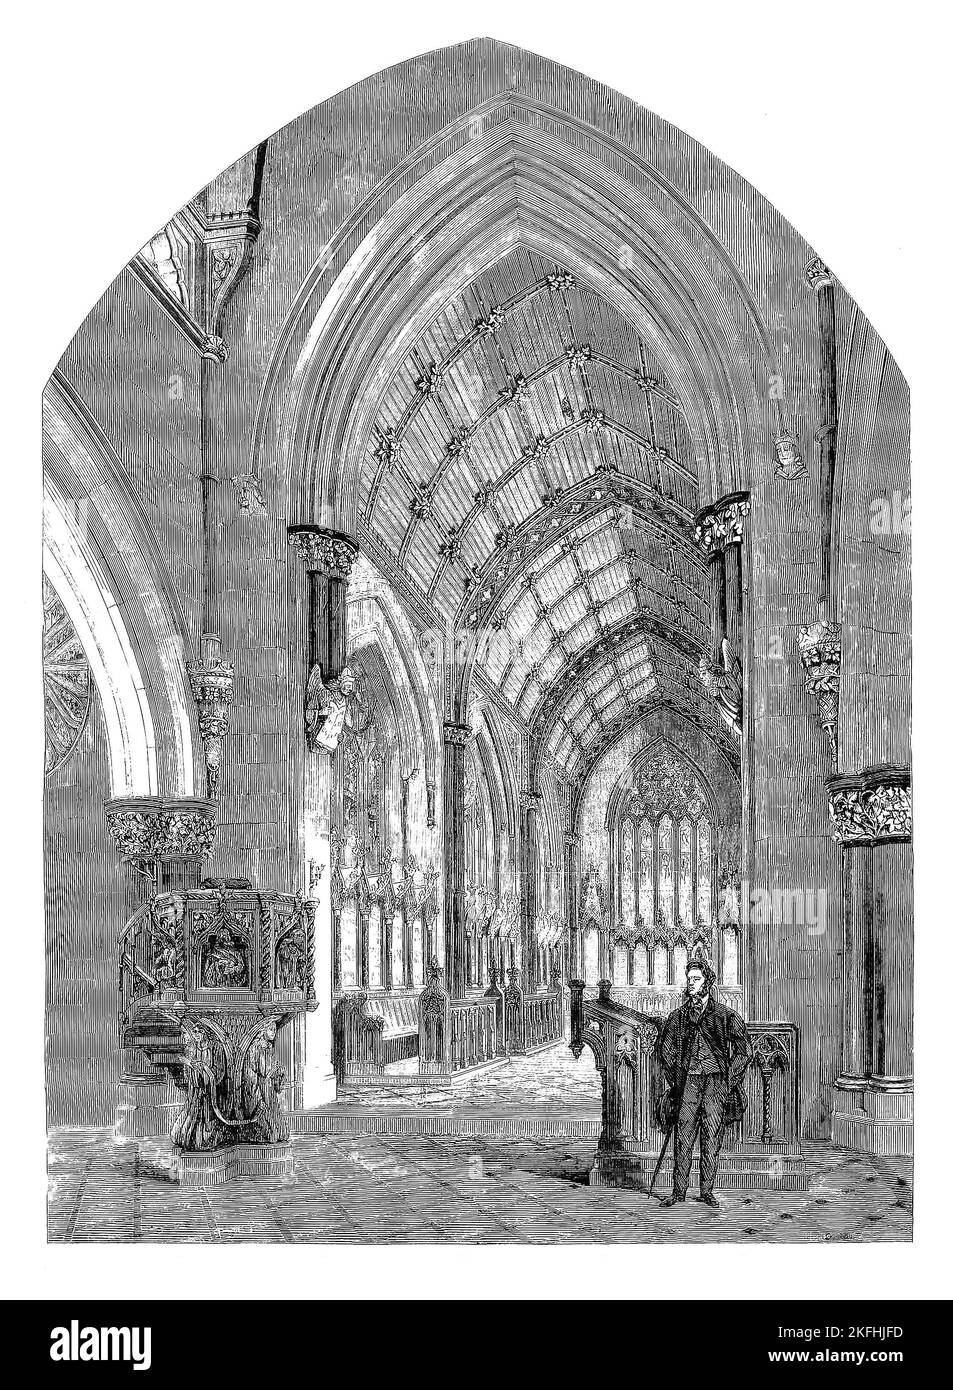 A mid-19th century view of St Margaret's Church (nicknamed The Marble Church), Bodelwyddan, St Asaph,  in the lower Vale of Clwyd in Denbighshire, Wales. The Decorated Gothic Style parish church was designed by John Gibson and consecrated by the Bishop of St Asaph on 23 August 1860. The church contains fourteen varieties of marble and elaborate woodwork. Stock Photo